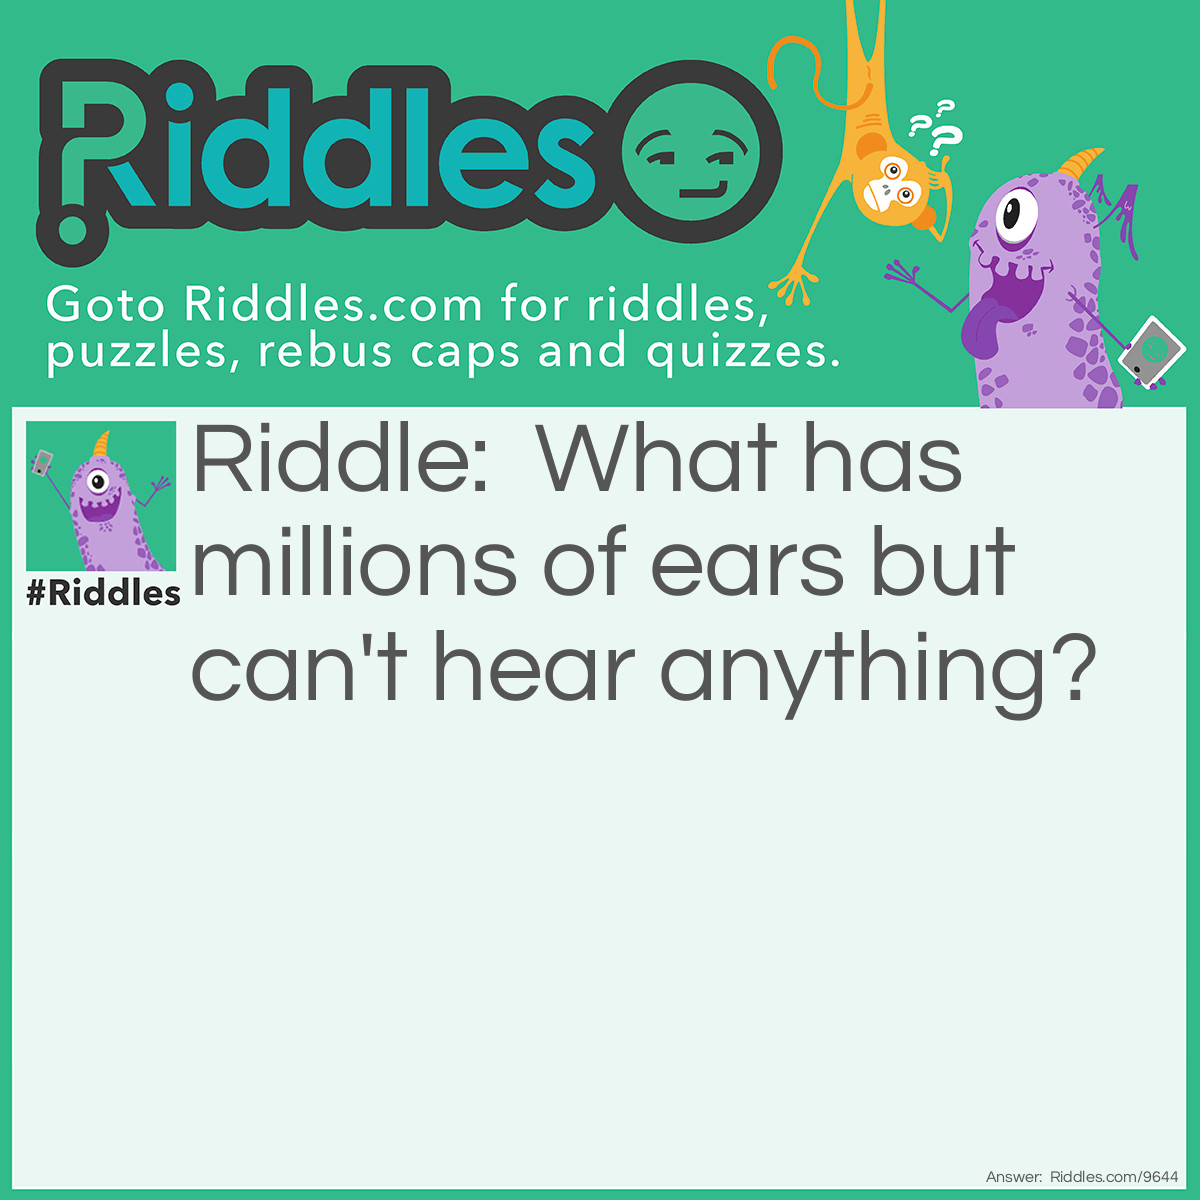 Riddle: What has millions of ears but can't hear anything? Answer: Corn.